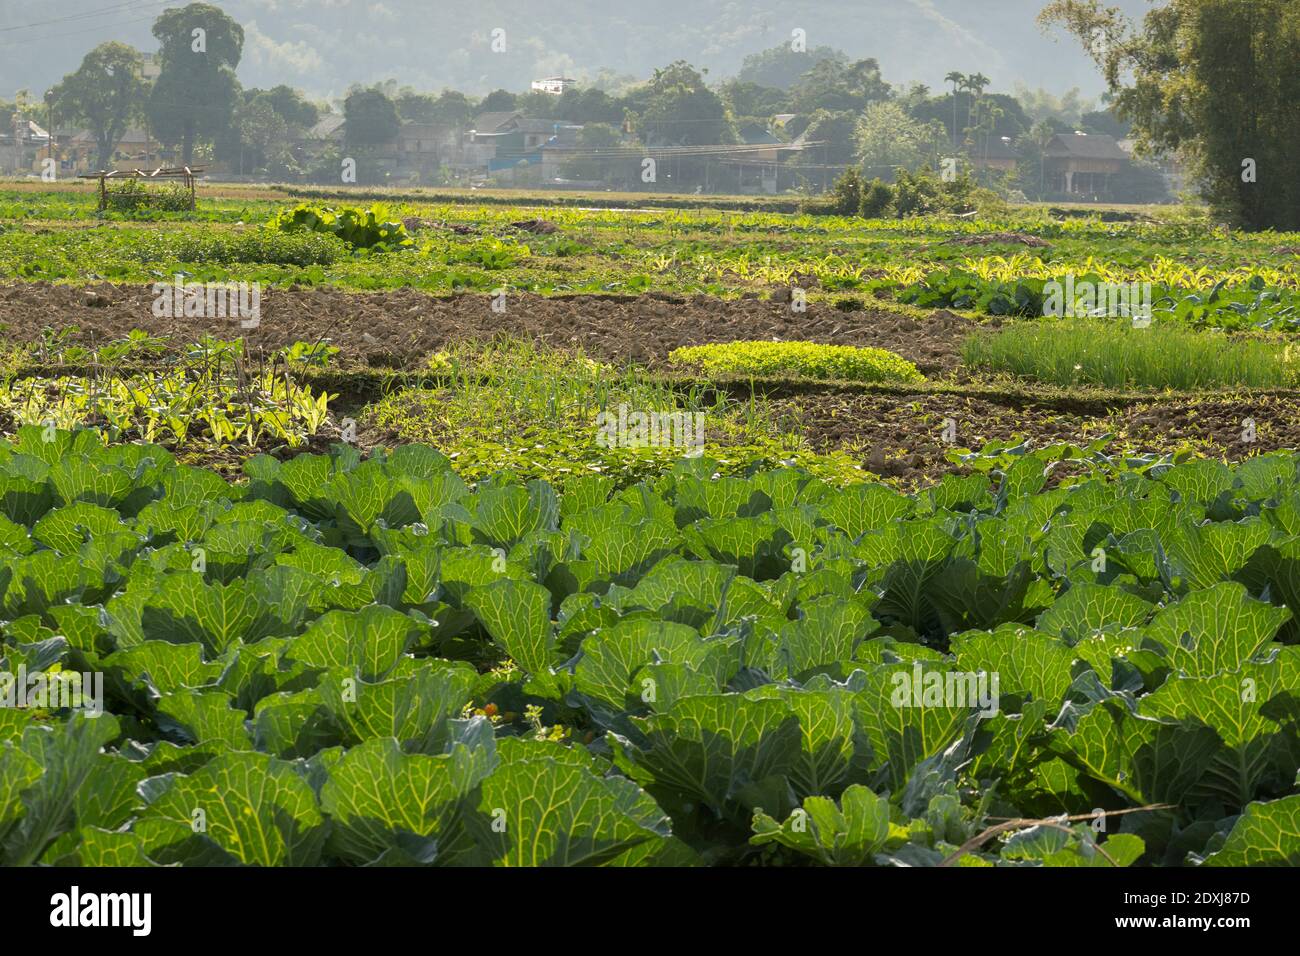 Rows of cabbages on a farm Stock Photo